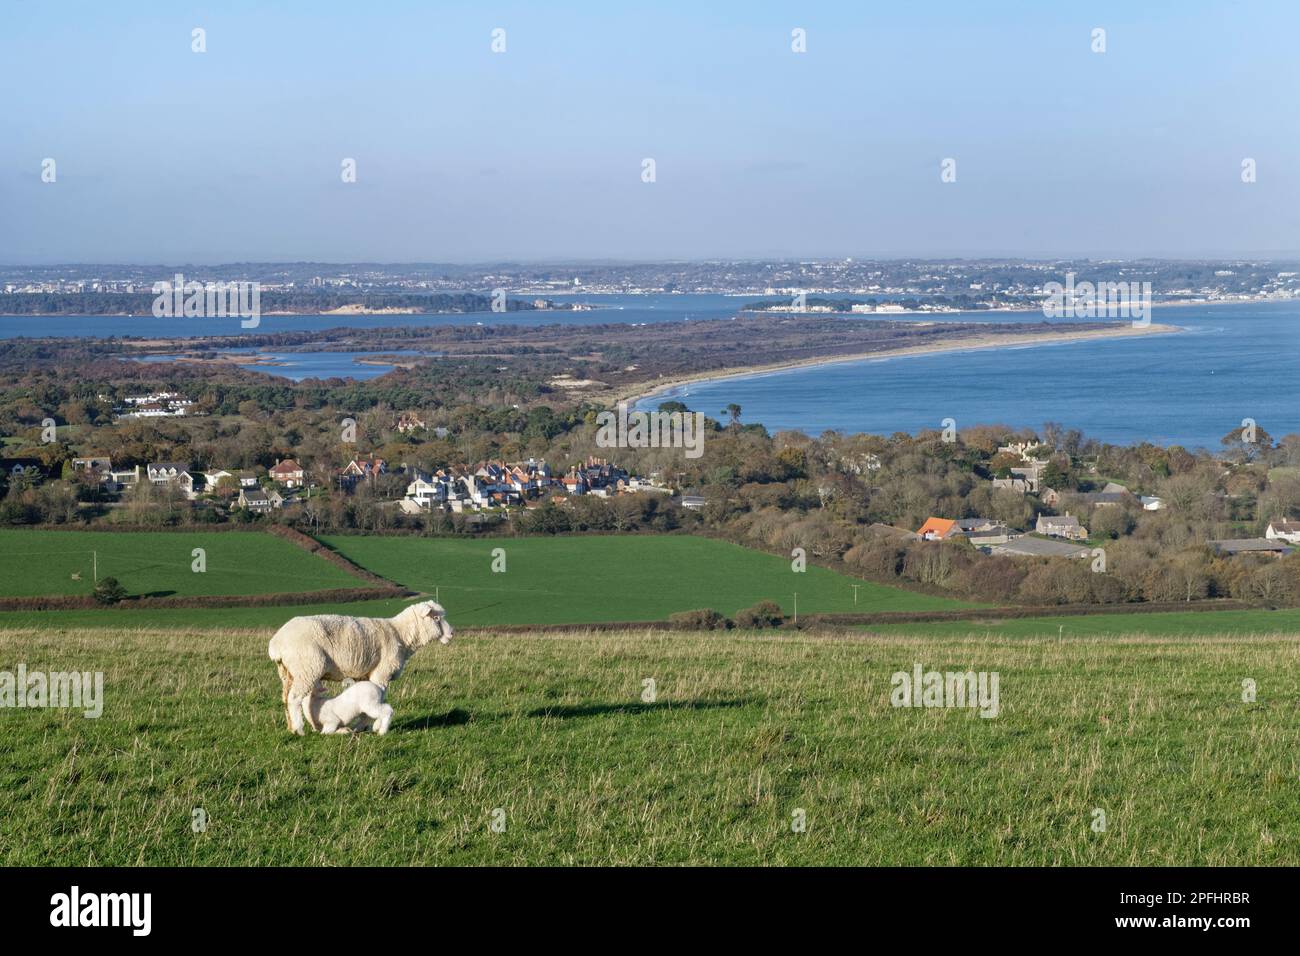 Dorset sheep (Ovis aries) lamb suckling from its mother with Studland village, peninsula and Poole Harbour in the background, Ballard Down, Dorset, UK Stock Photo